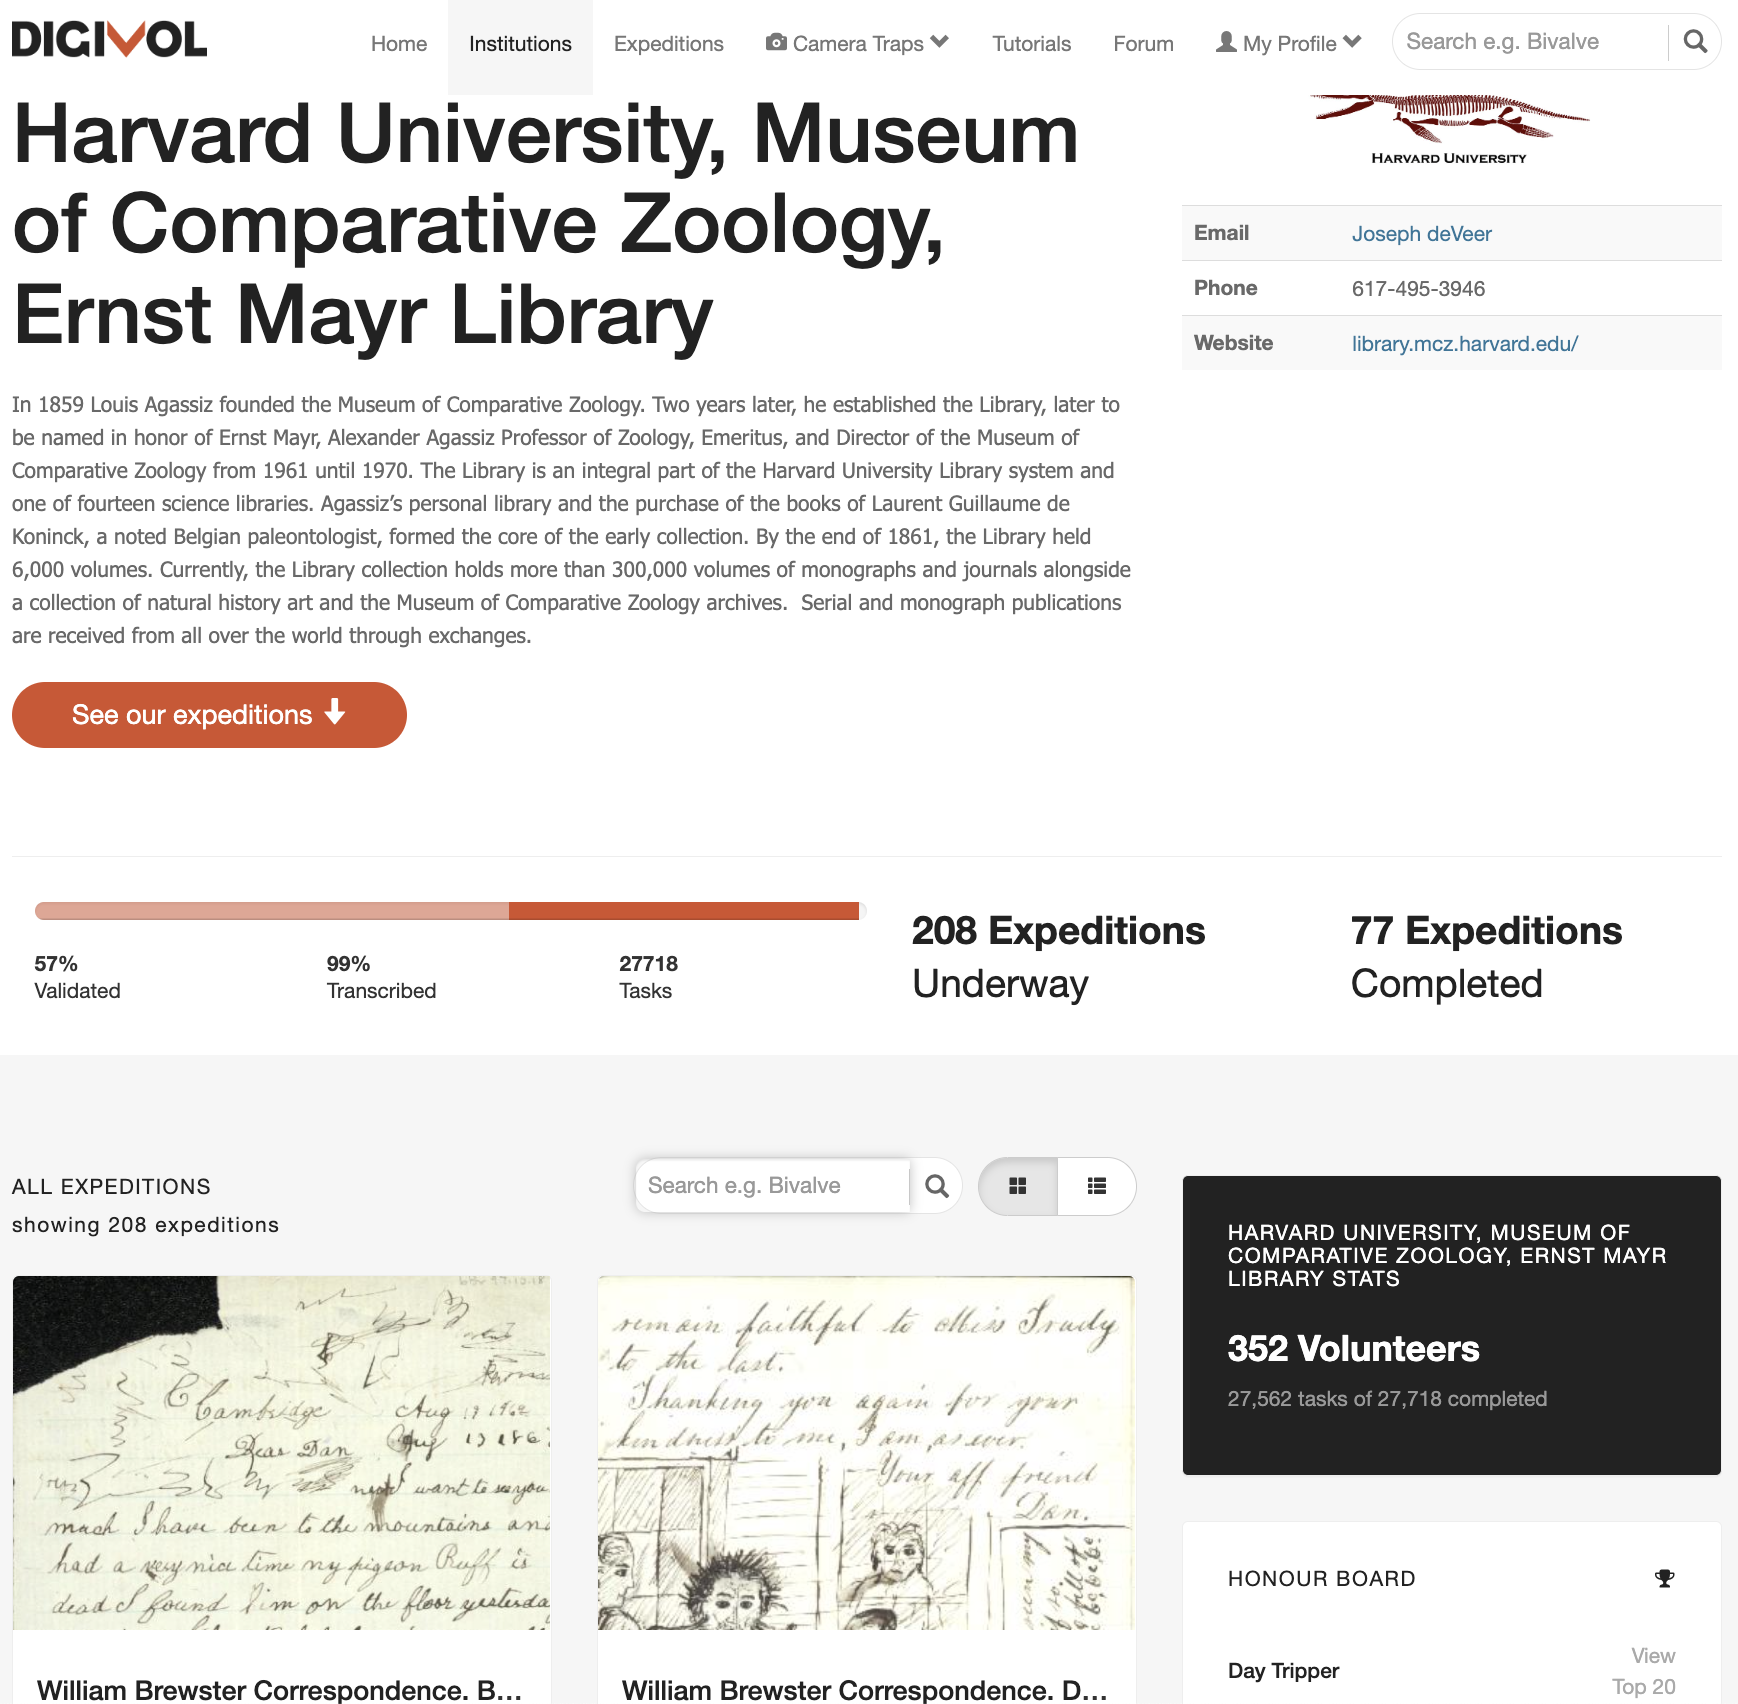 Screenshot of the Harvard University, Museum of Comparative Zoology, Ernst Mayr Library transcription portal on DigiVol platform, listing the number of expeditions and volunteers